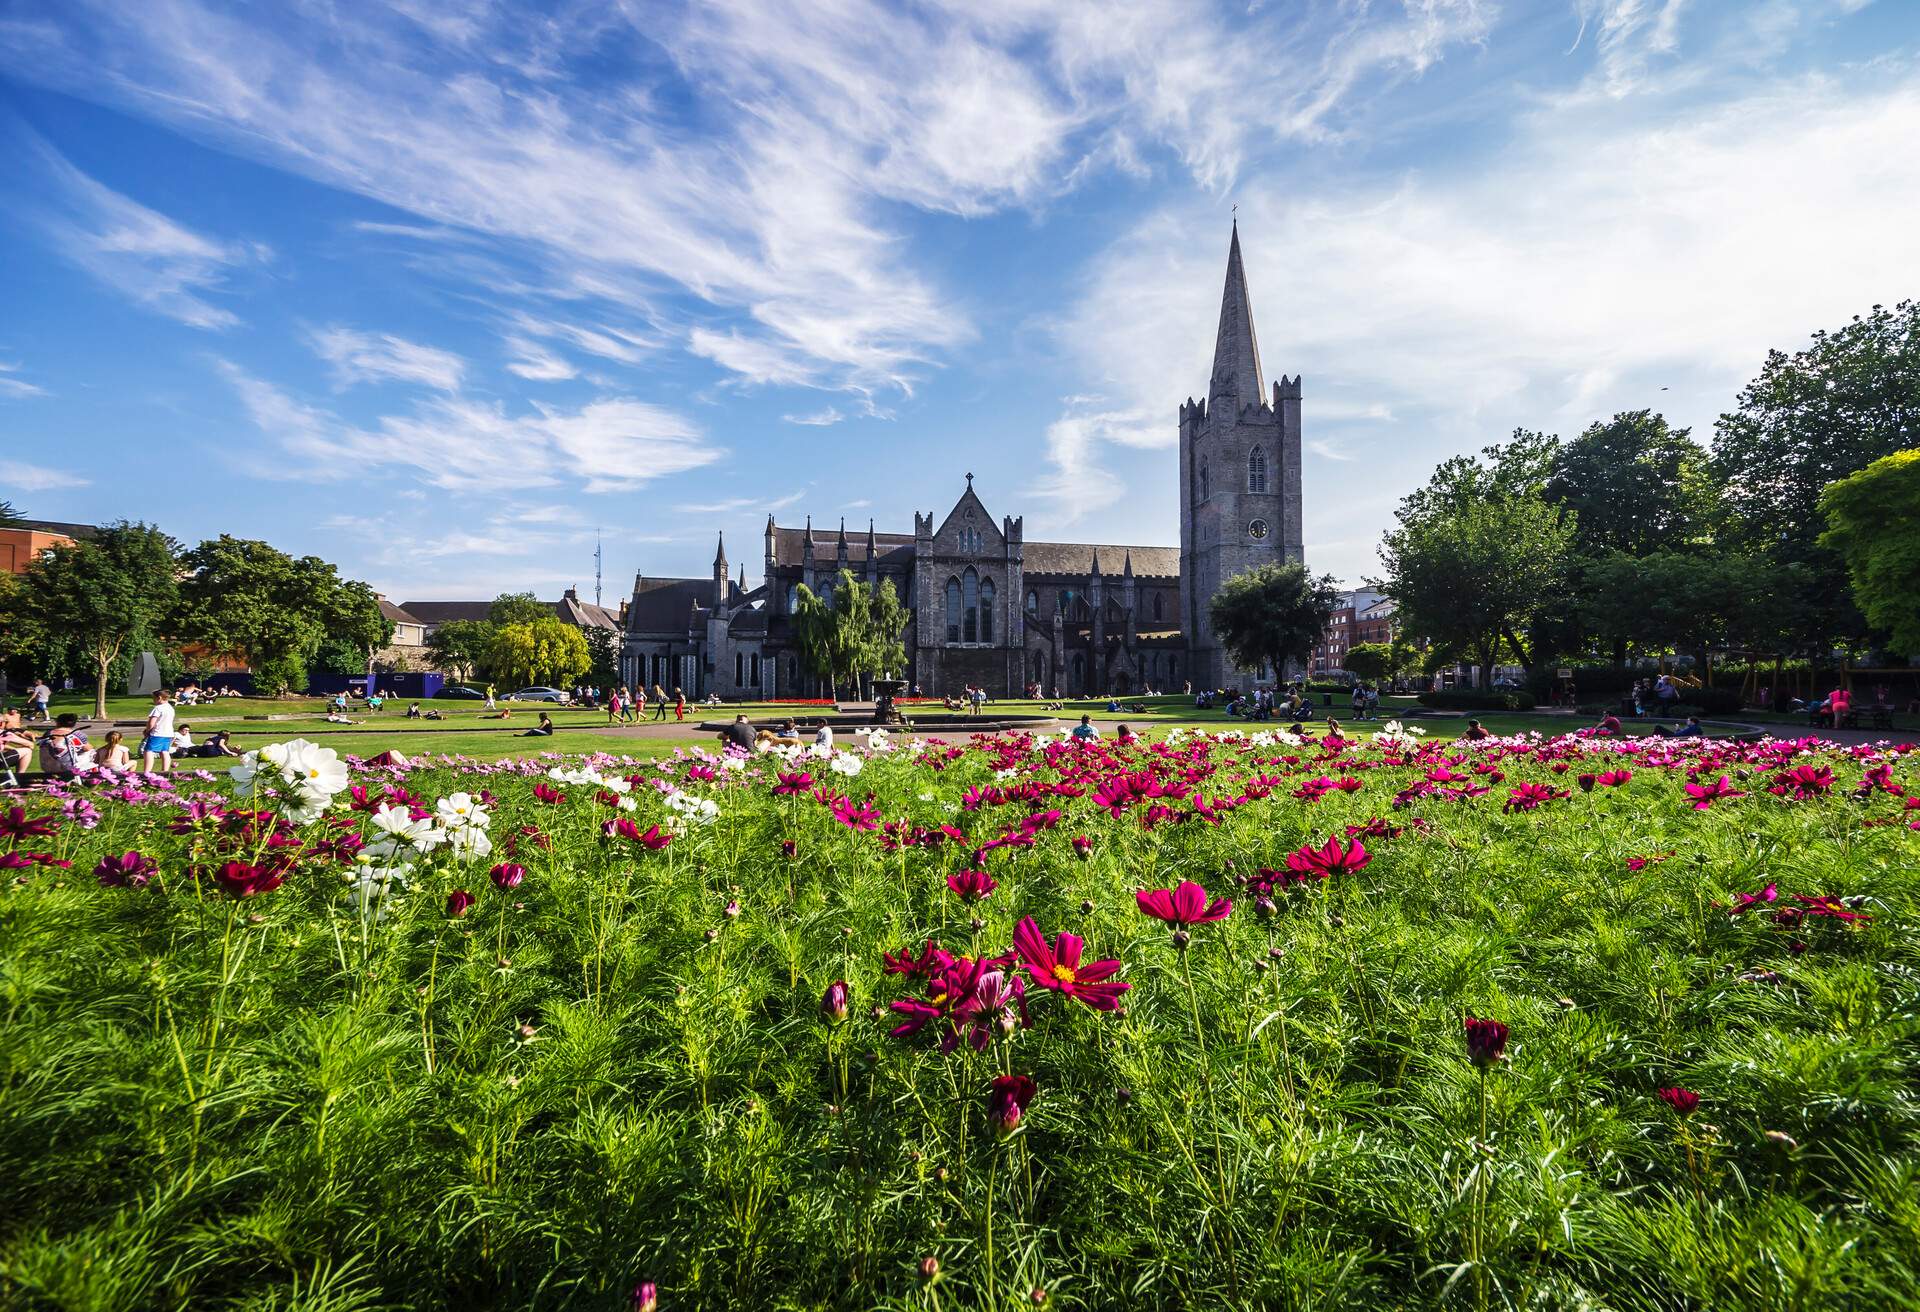 The cathedral of St Patrick in Dublin on a sunny summer day with pink flowers in the front